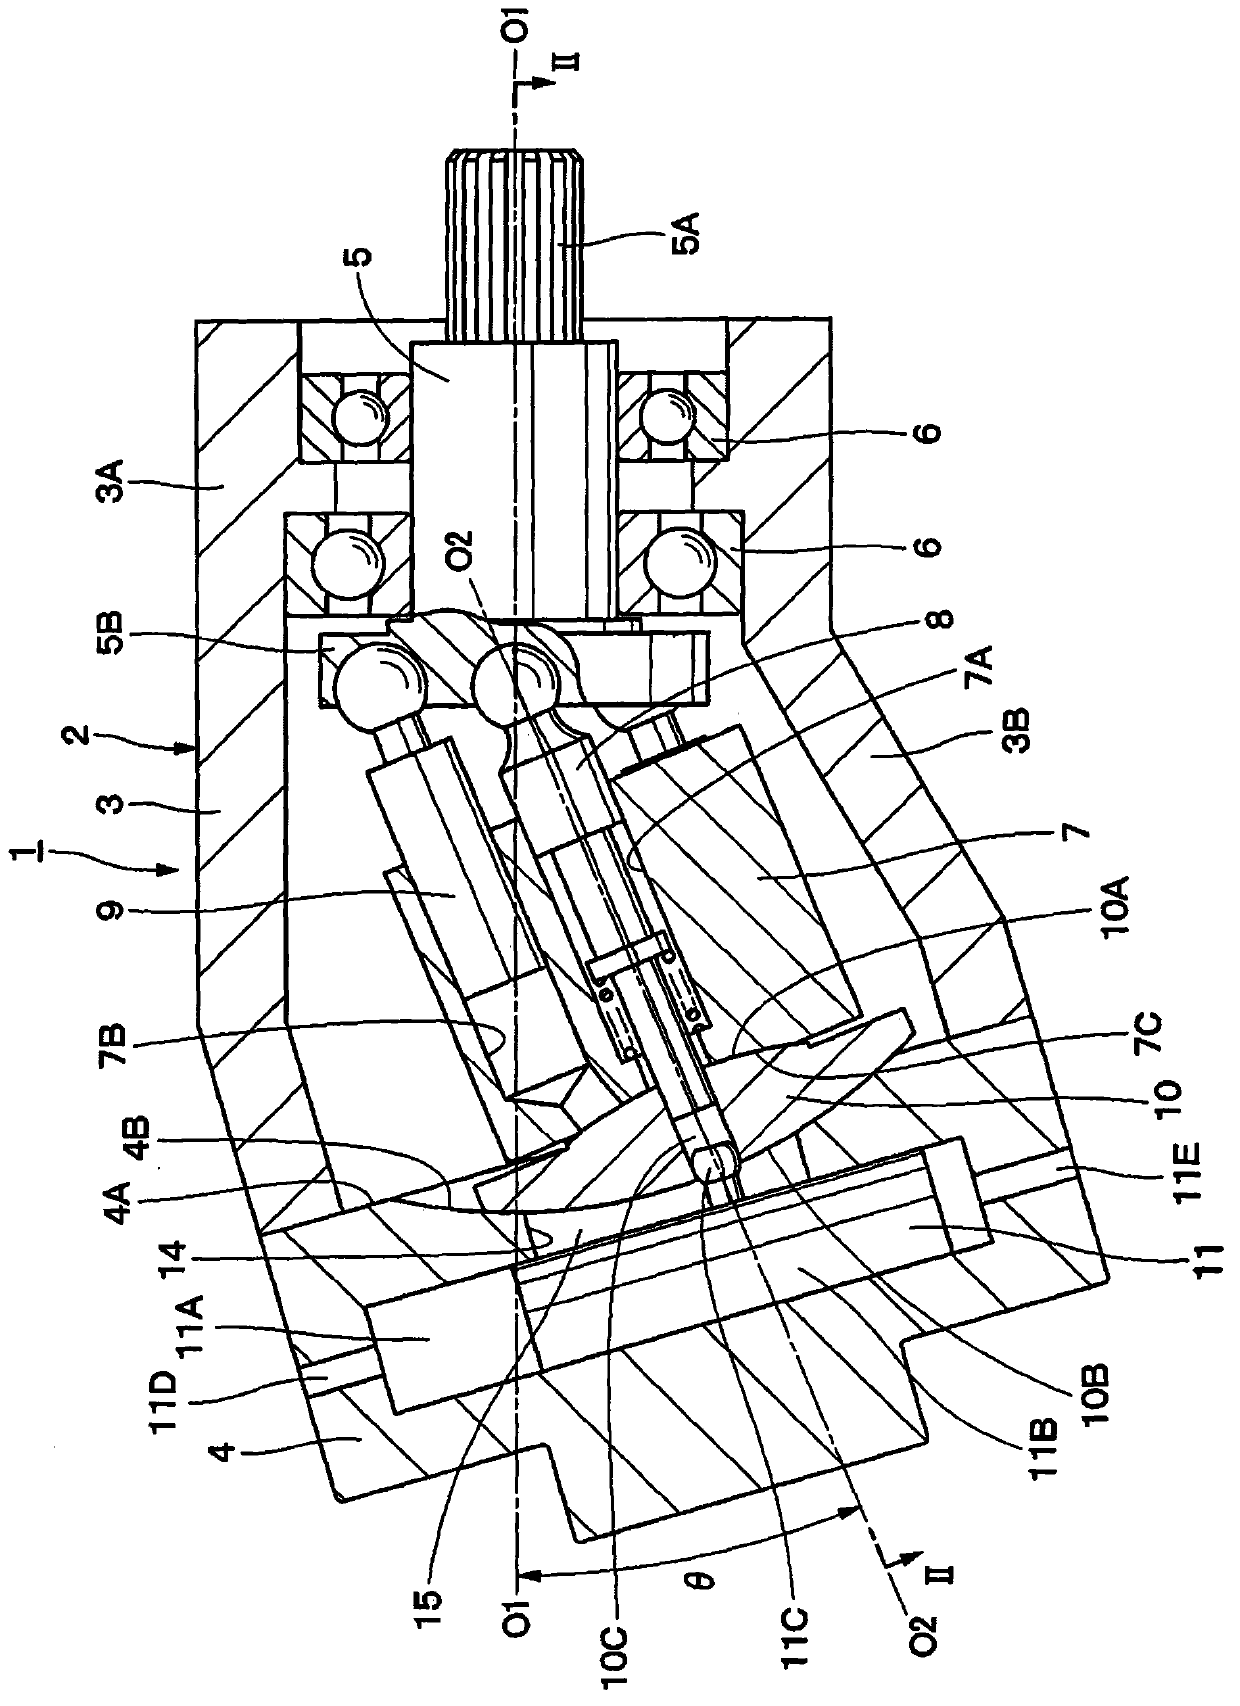 Variable volume type inclined-shaft hydraulic pump